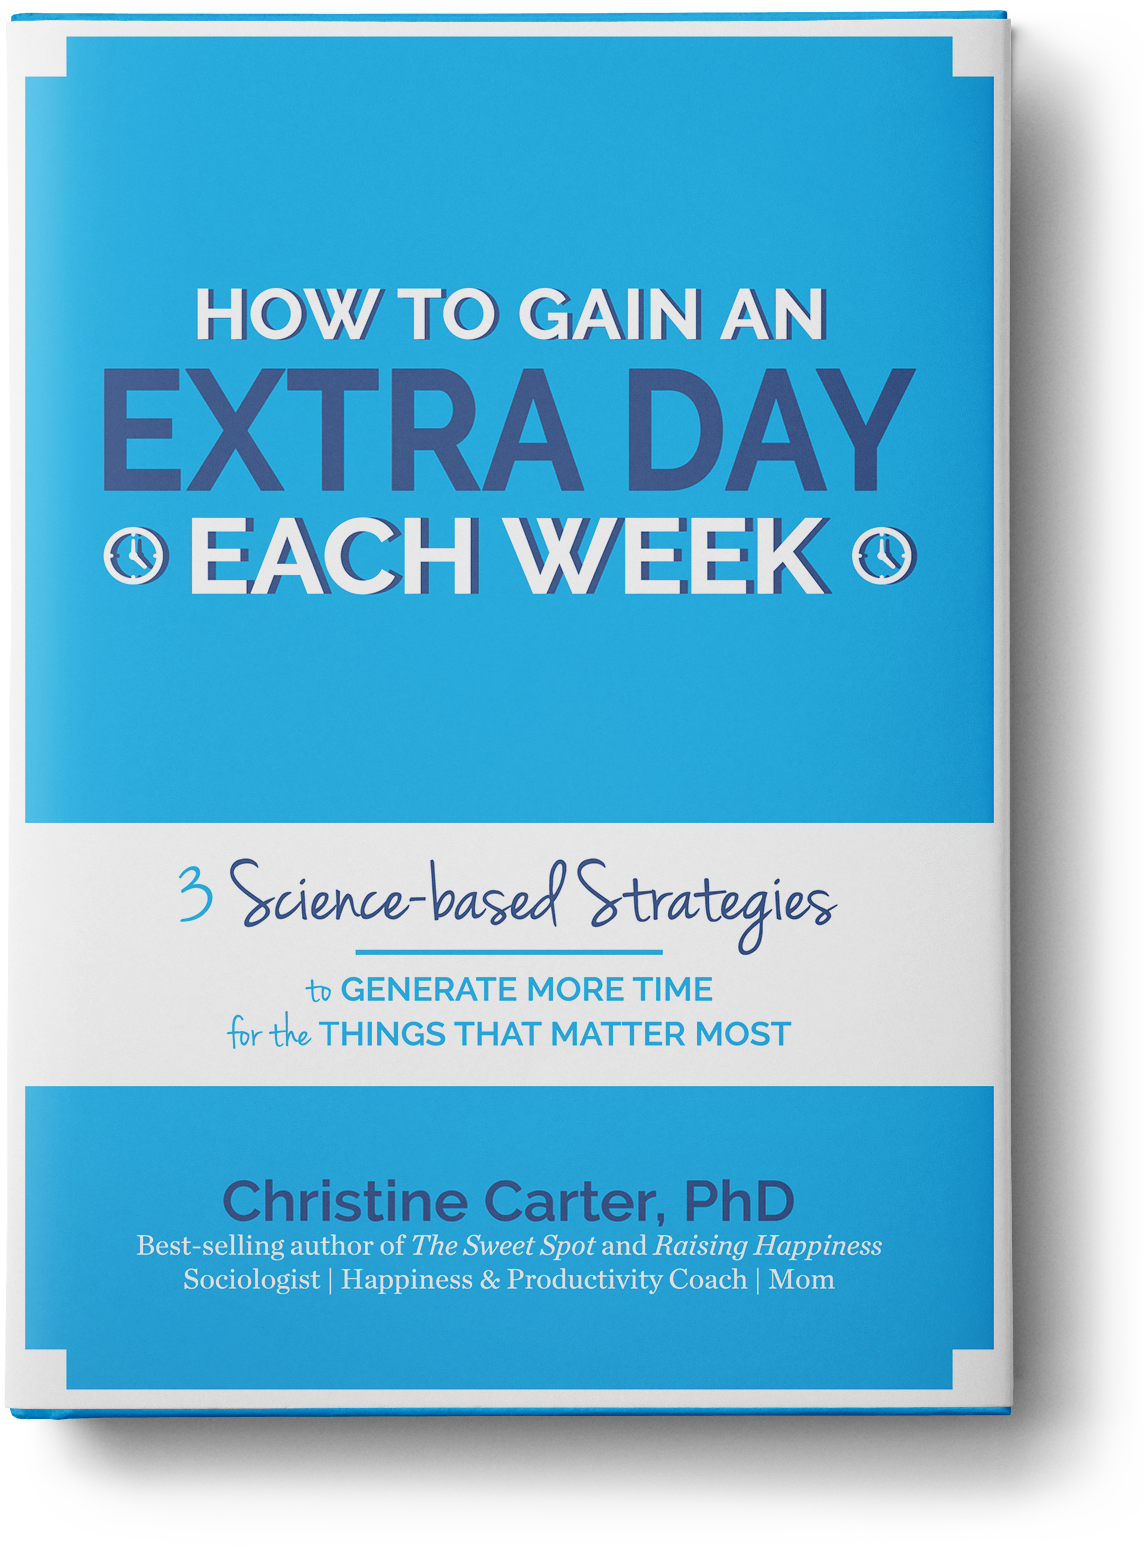 Gain an Extra Day Each Week eBook Cover - ChristineCarter.com